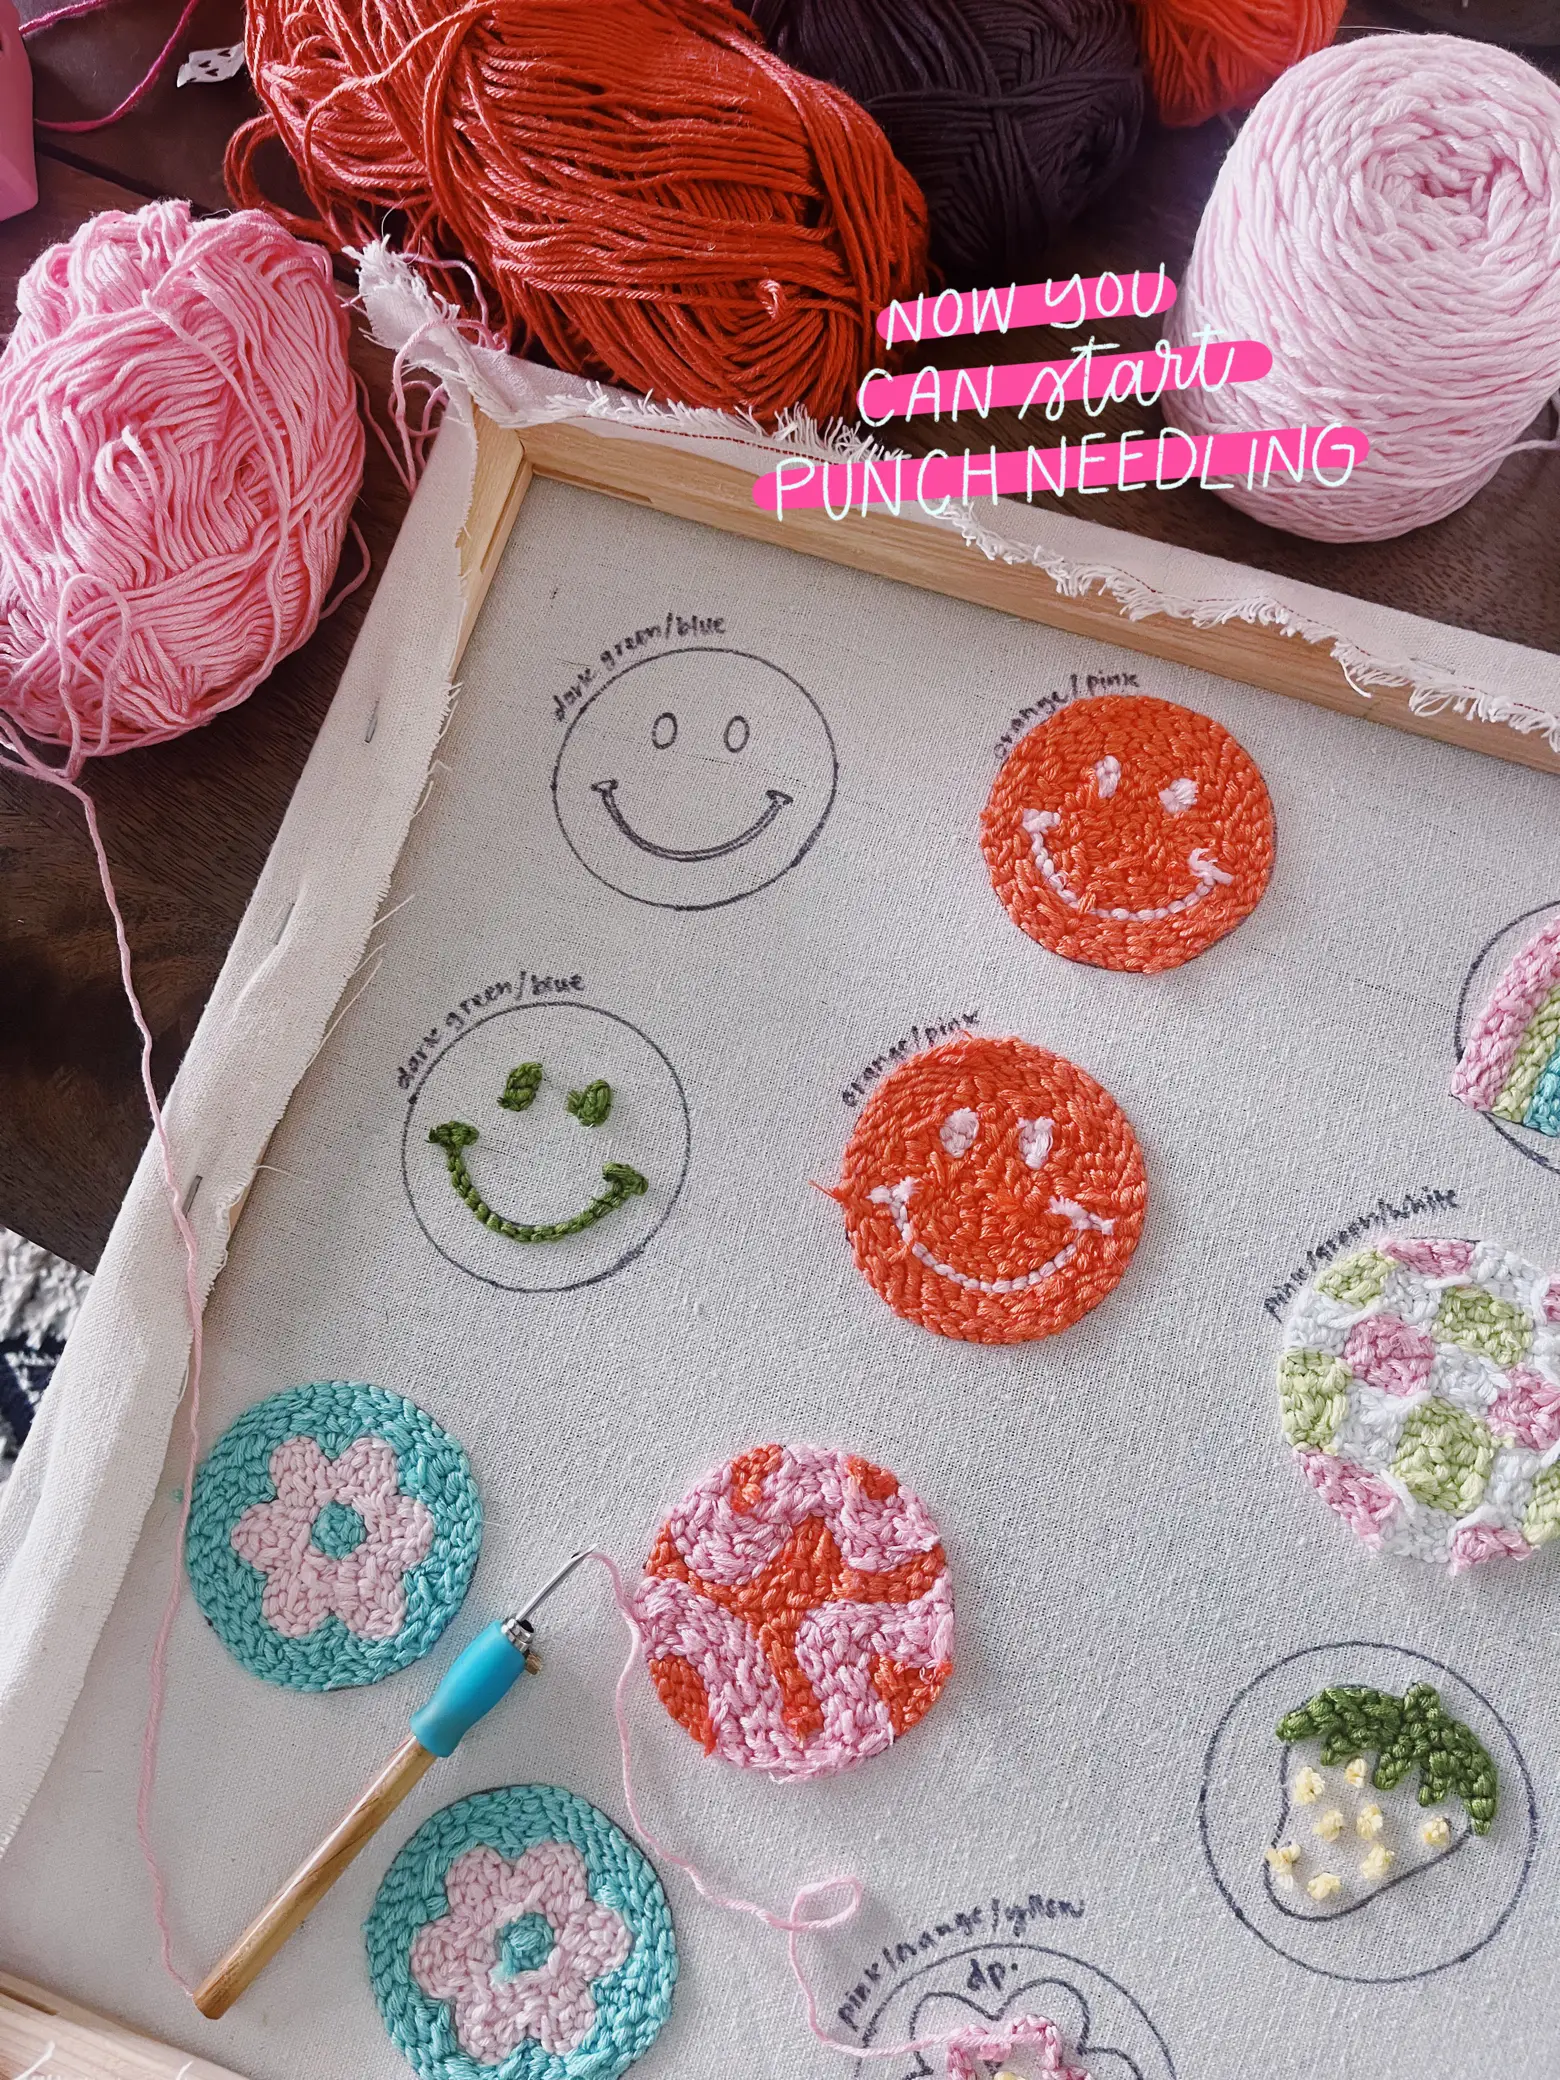 How to make a wooden canvas for punch needle embroidery